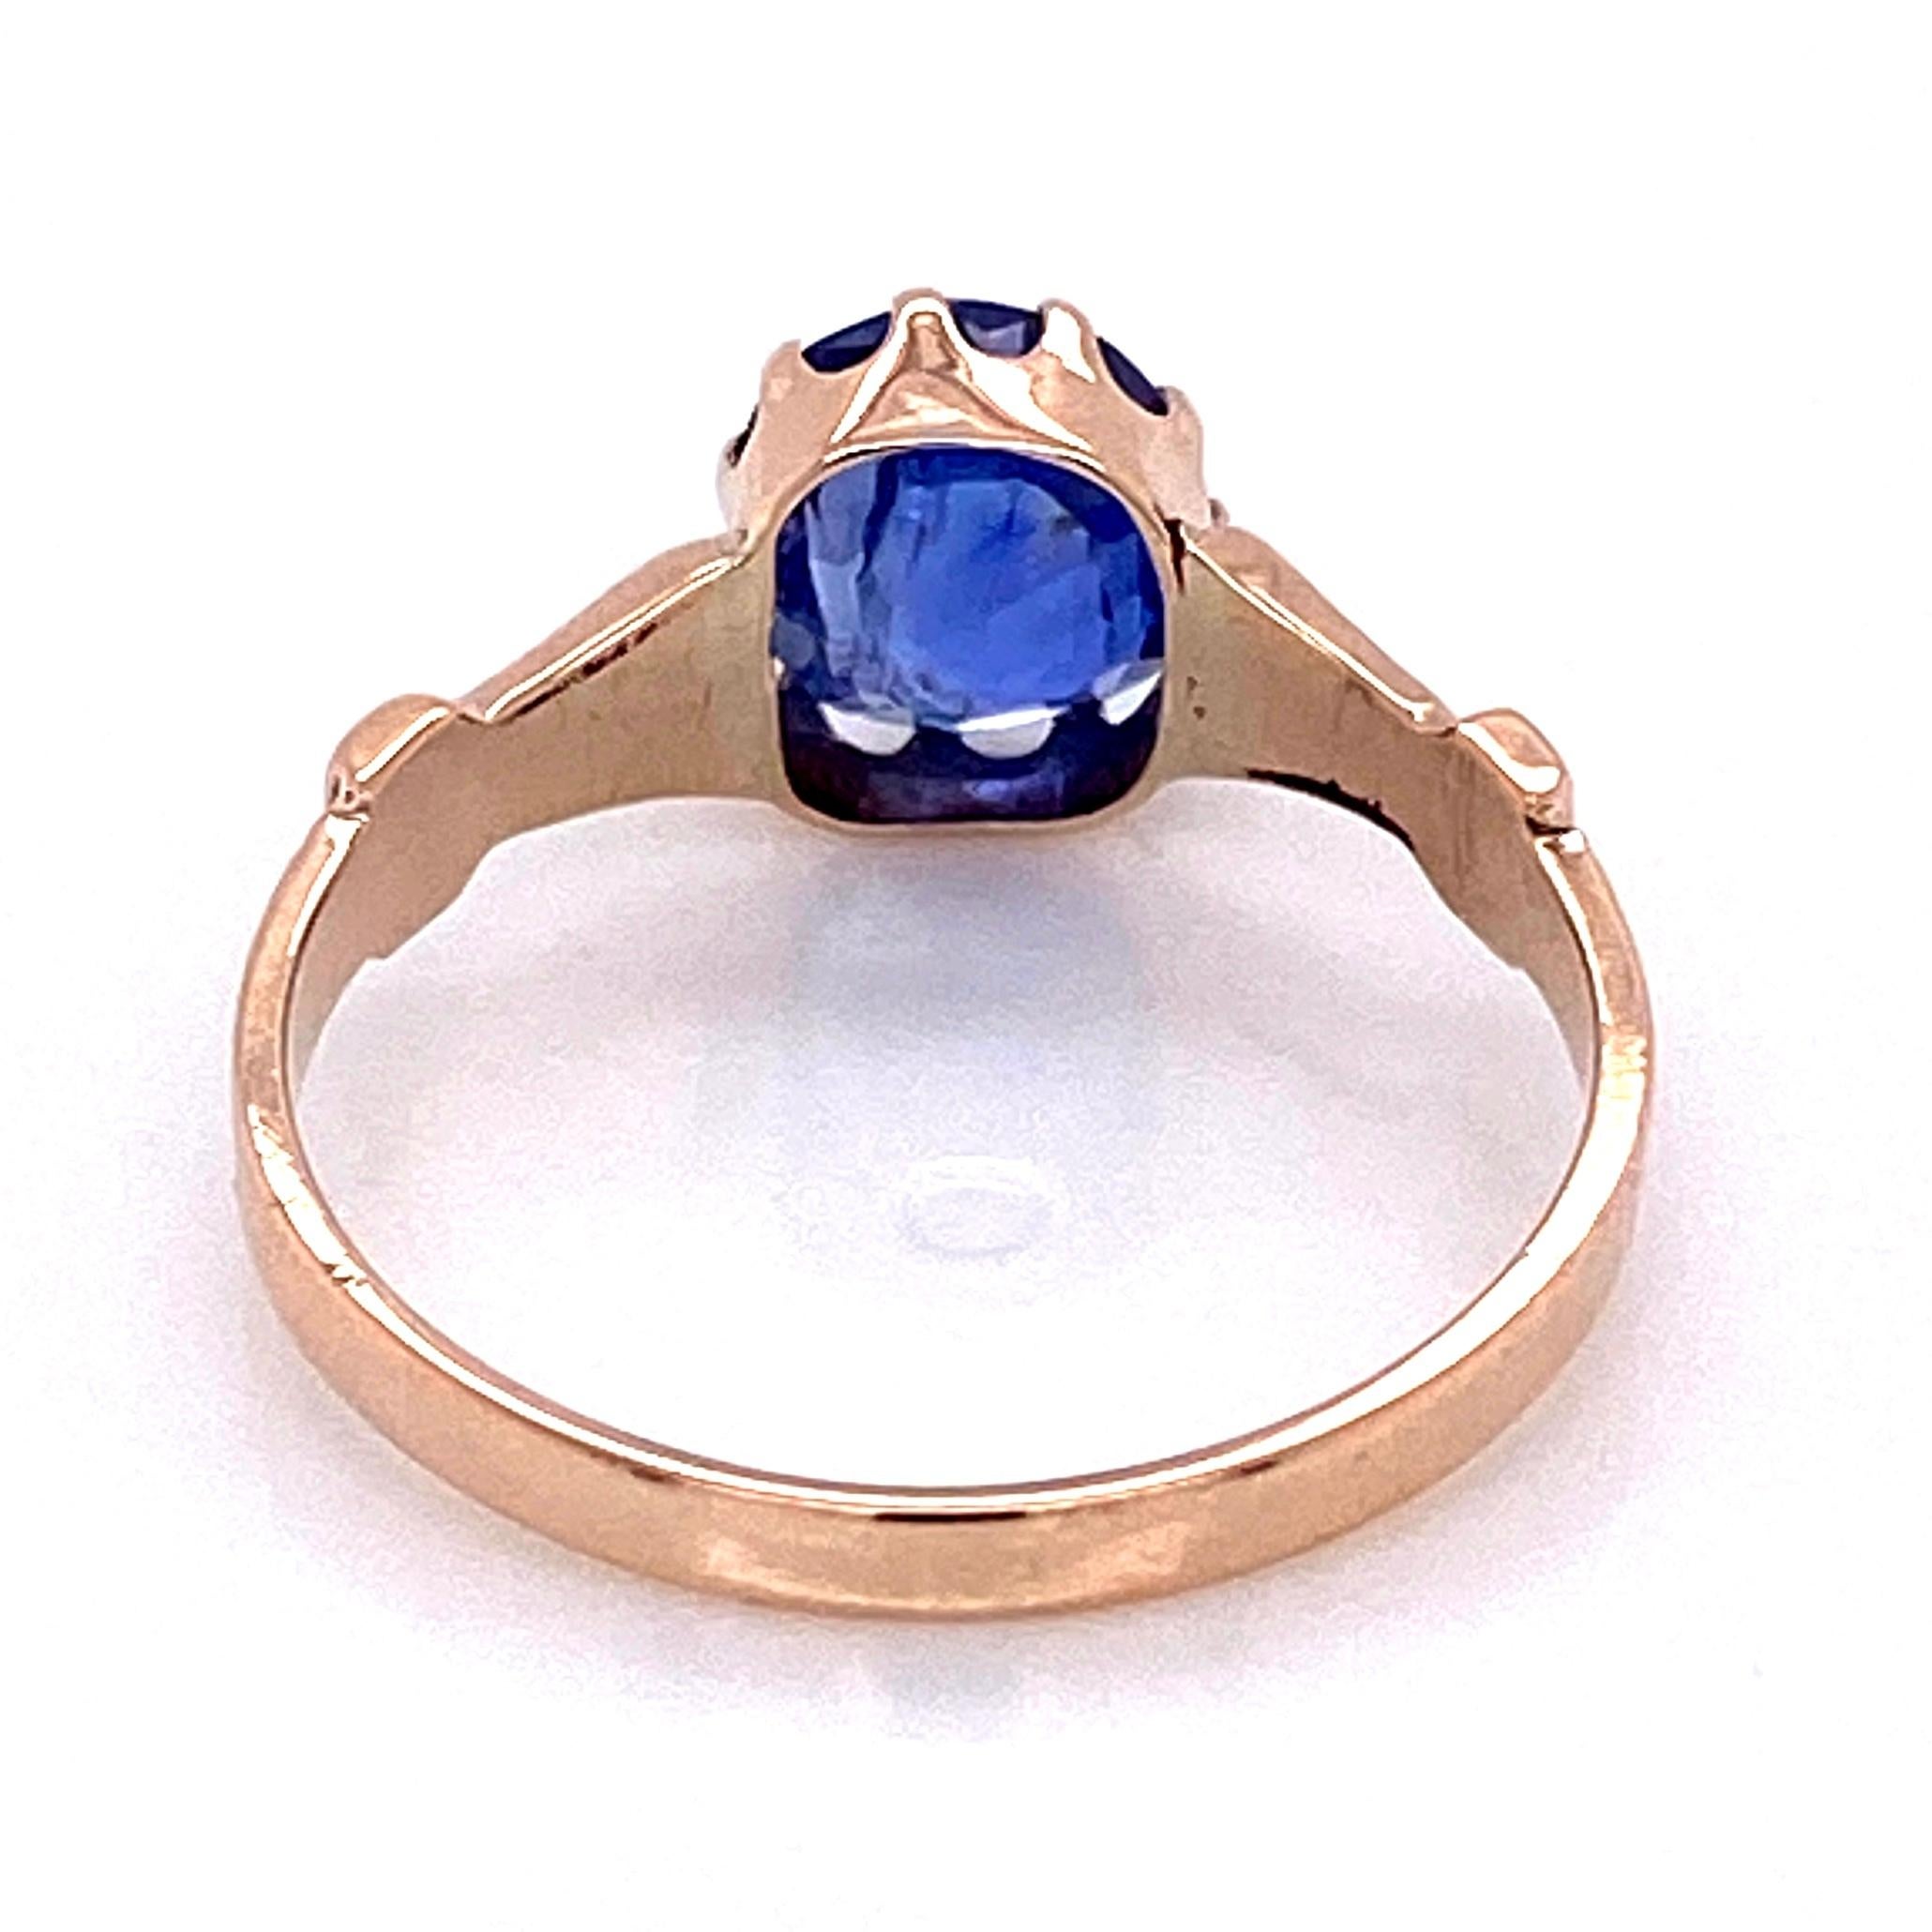 Vintage 1.51 Carat No Heat Blue Sapphire Antique Gold Ring Fine Estate Jewelry In Excellent Condition For Sale In Montreal, QC